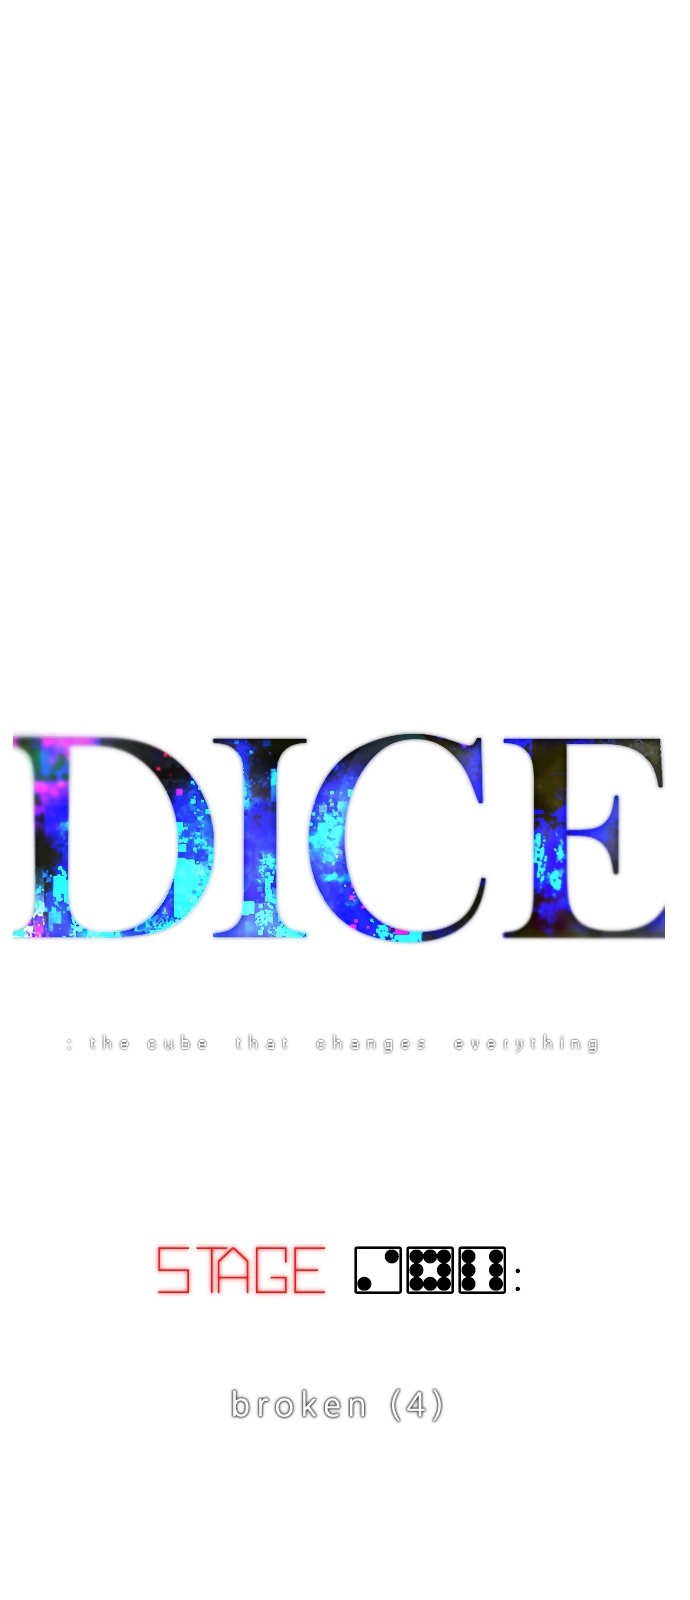 DICE: The Cube that Changes Everything Ch. 286 broken (4)